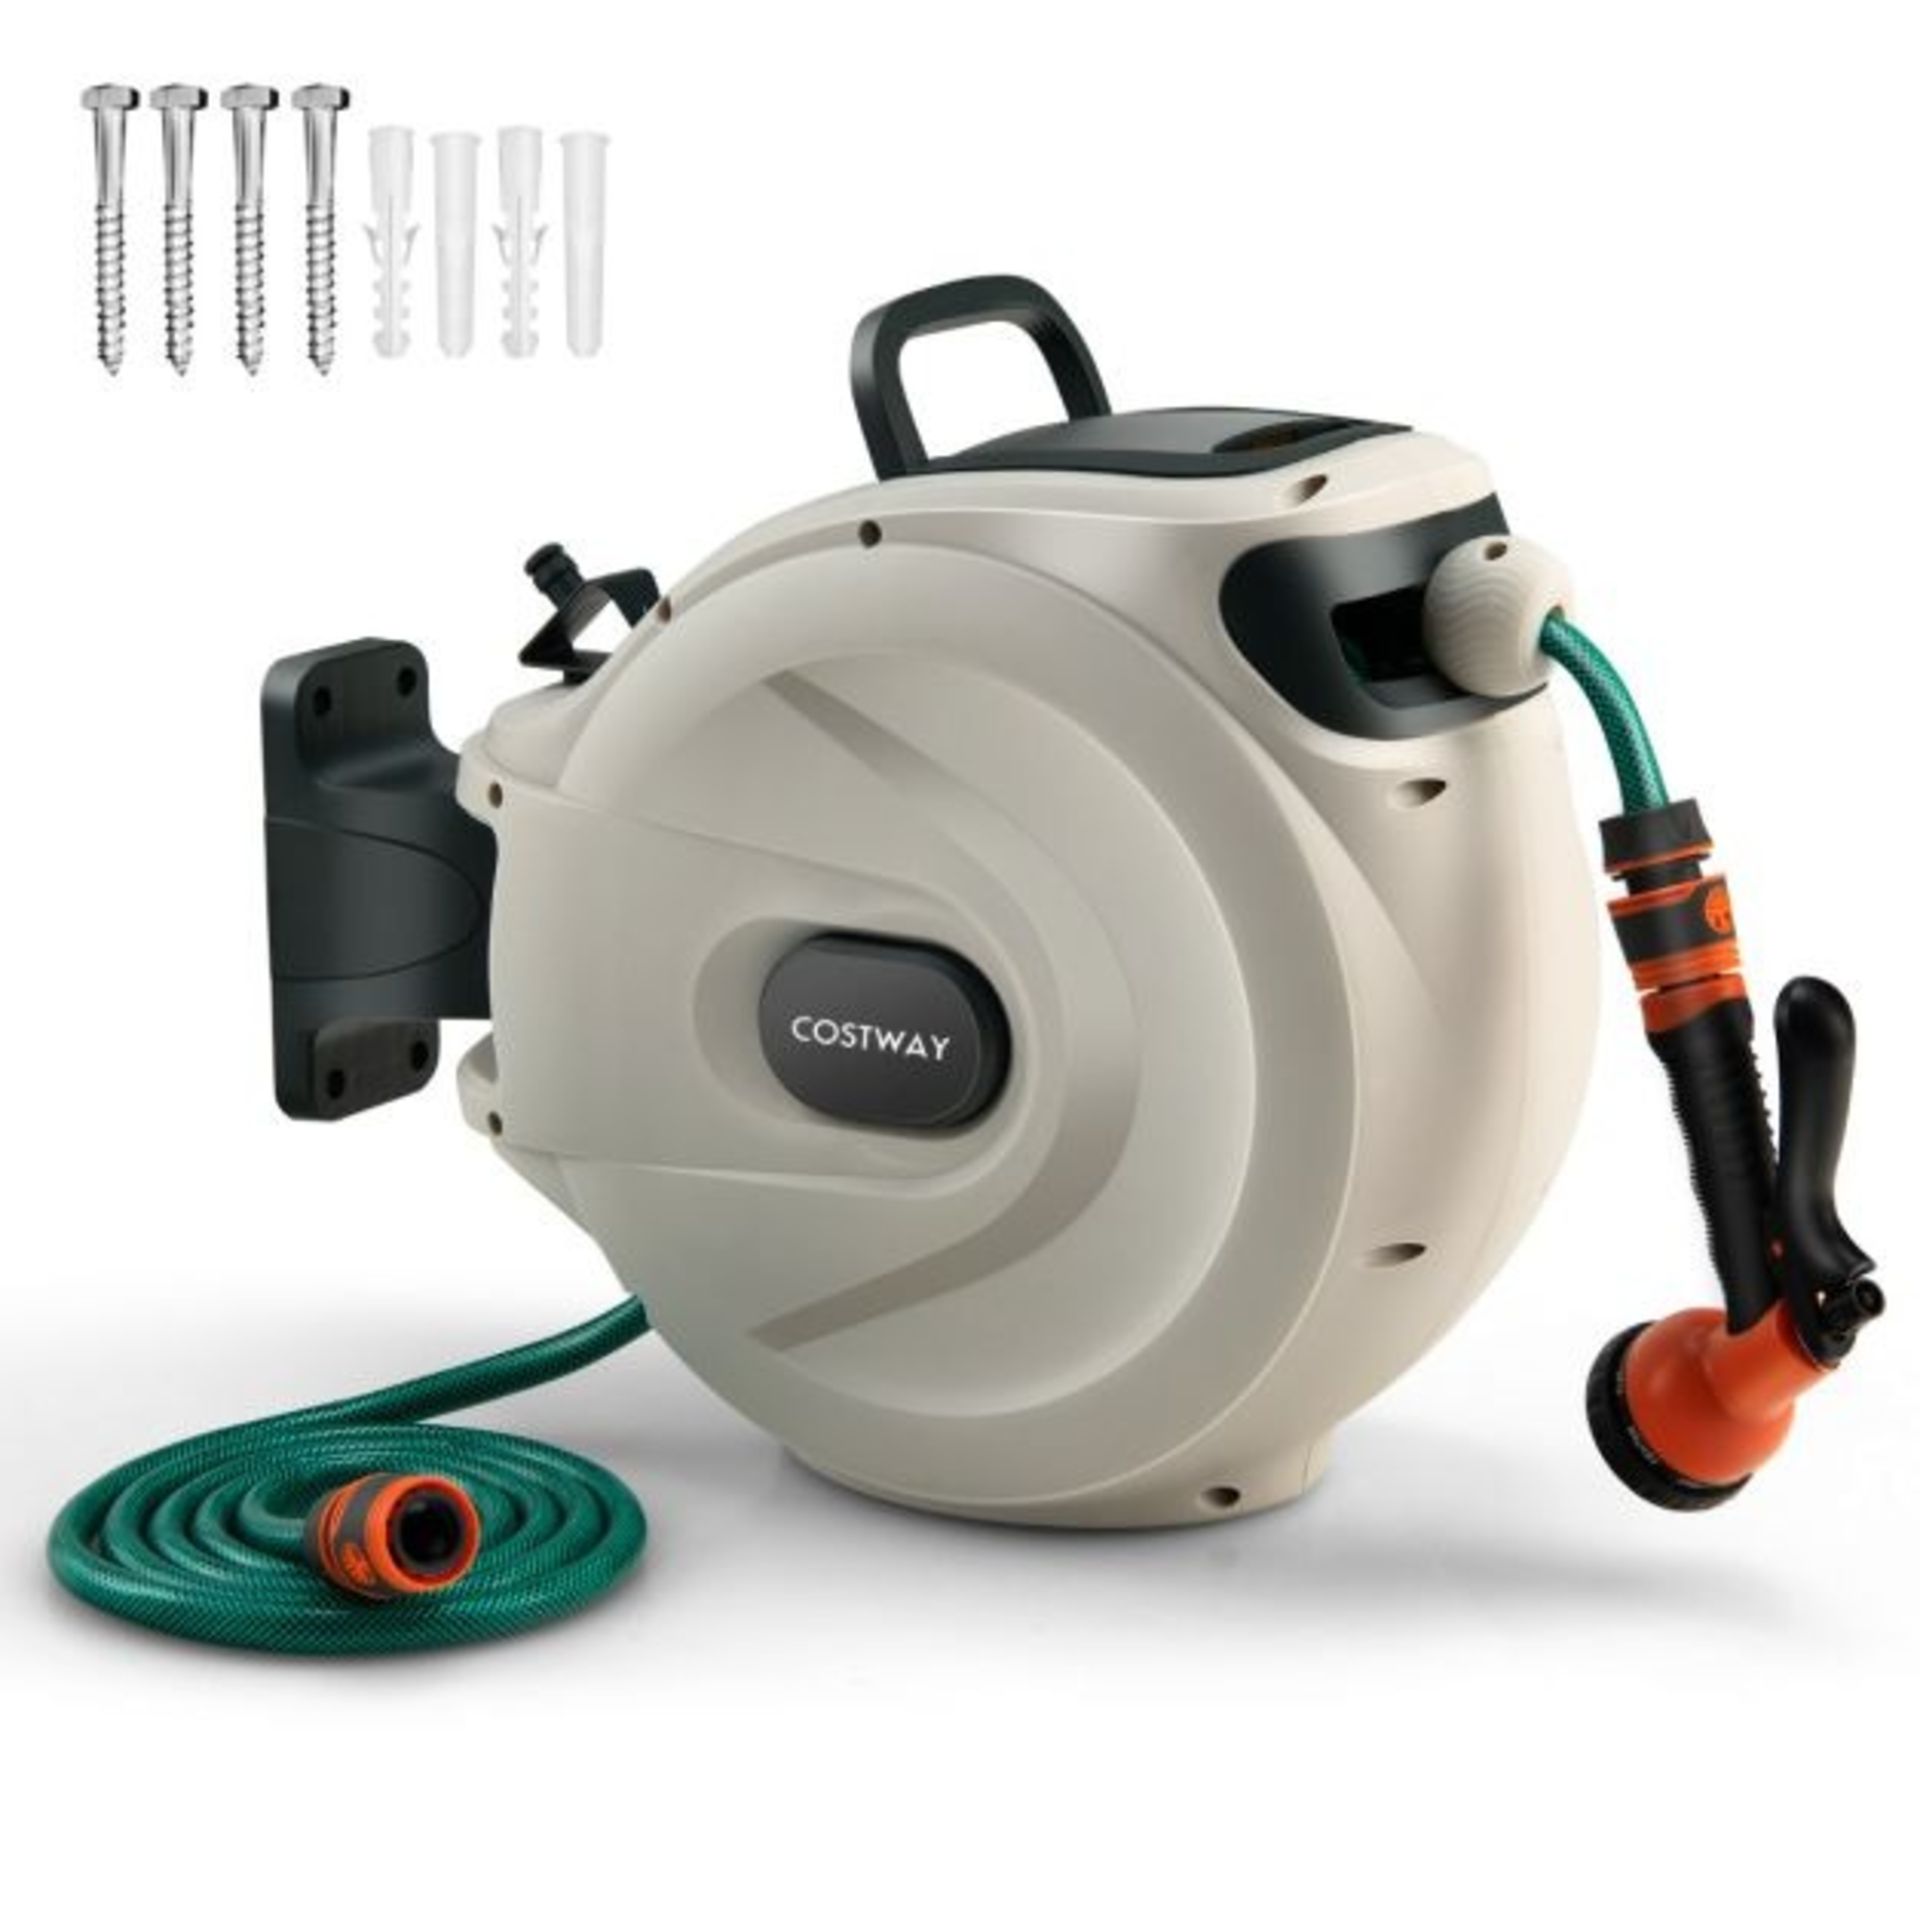 Wall Mounted Hose Reel Retractable Auto Rewind - ER54